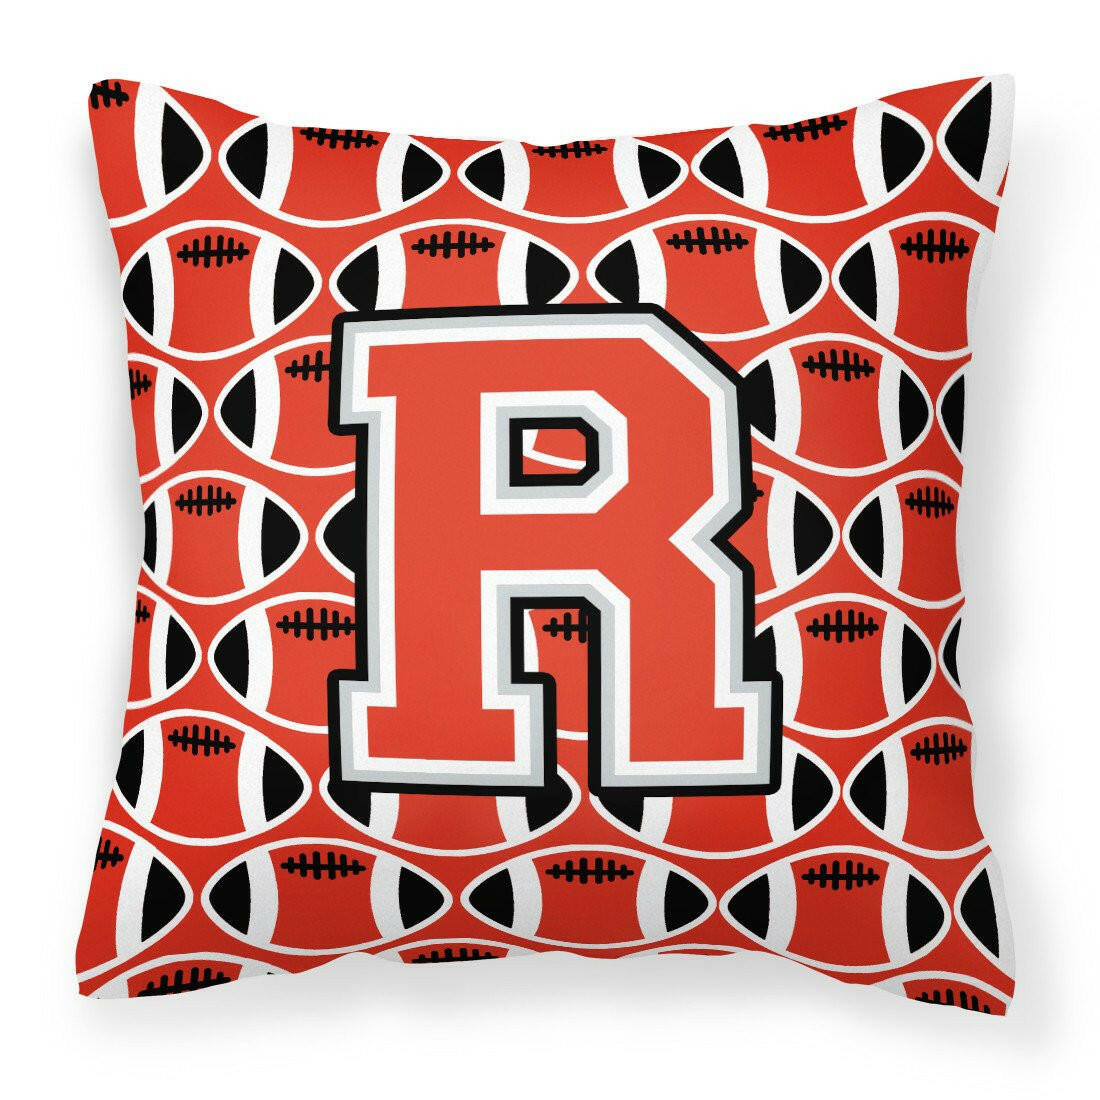 Letter R Football Scarlet and Grey Fabric Decorative Pillow CJ1067-RPW1414 by Caroline's Treasures